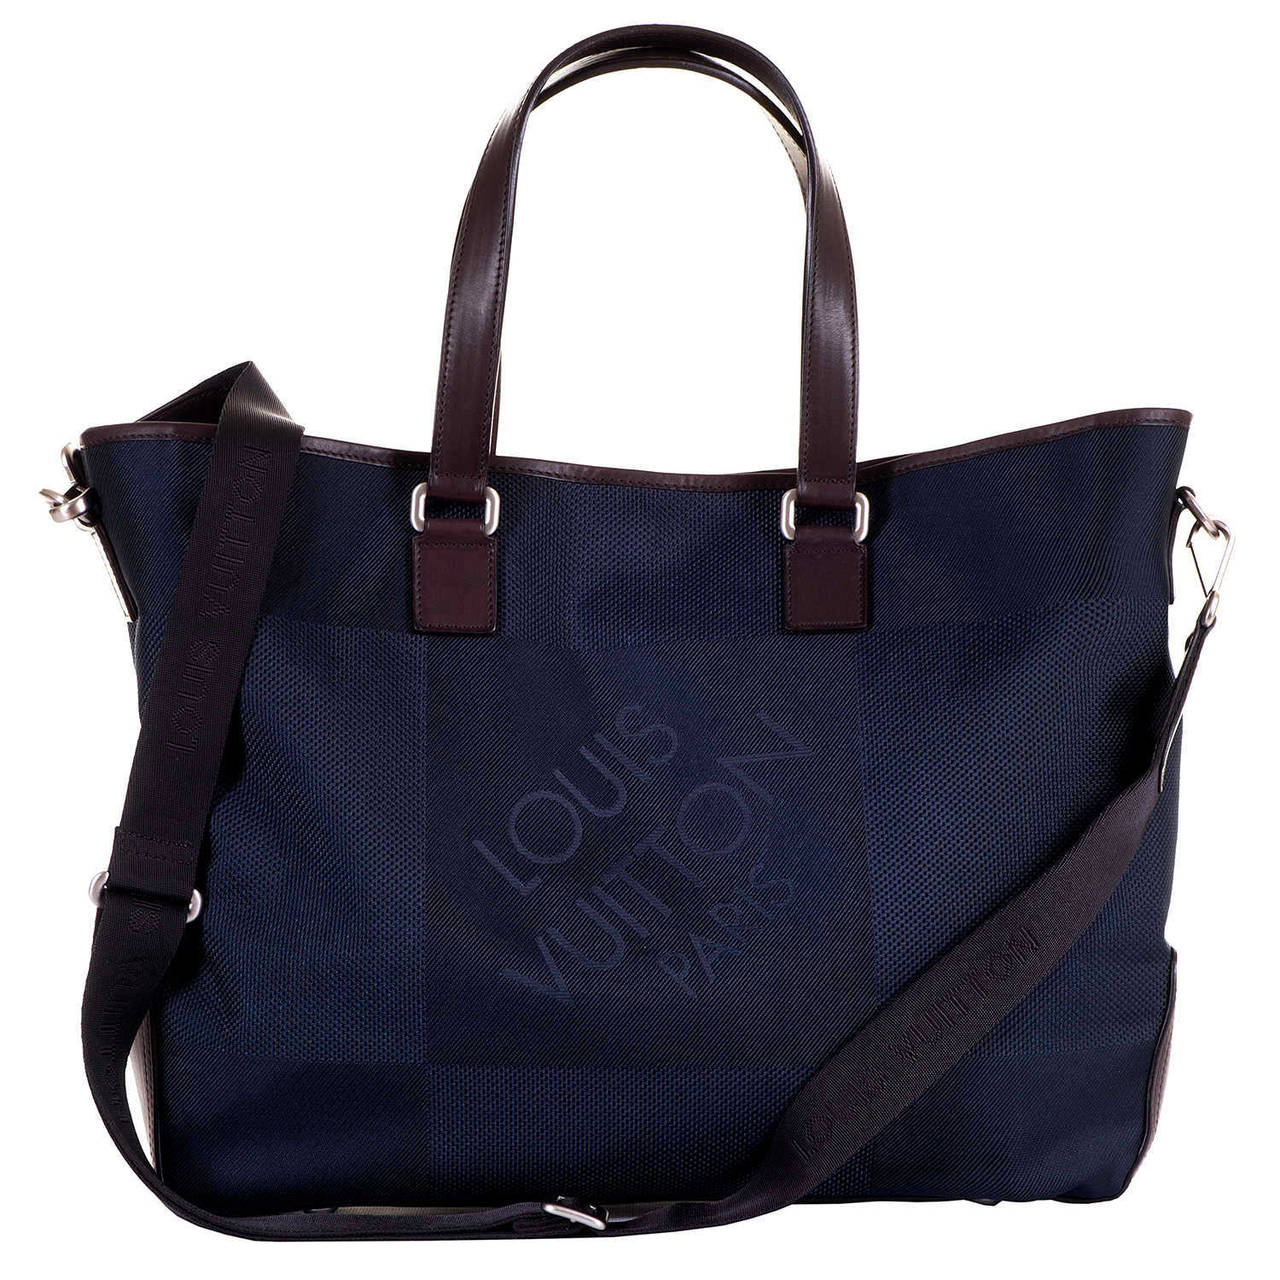 This fabulous 'Sac cabas' - shopping Bag, by Louis Vuitton, can be worn as a tote, or with it's adjustable strap can be used as a shoulder or cross-body bag. Finished in Navy Blue with choc. brown trim, and silver palladium hardware, the bag is in